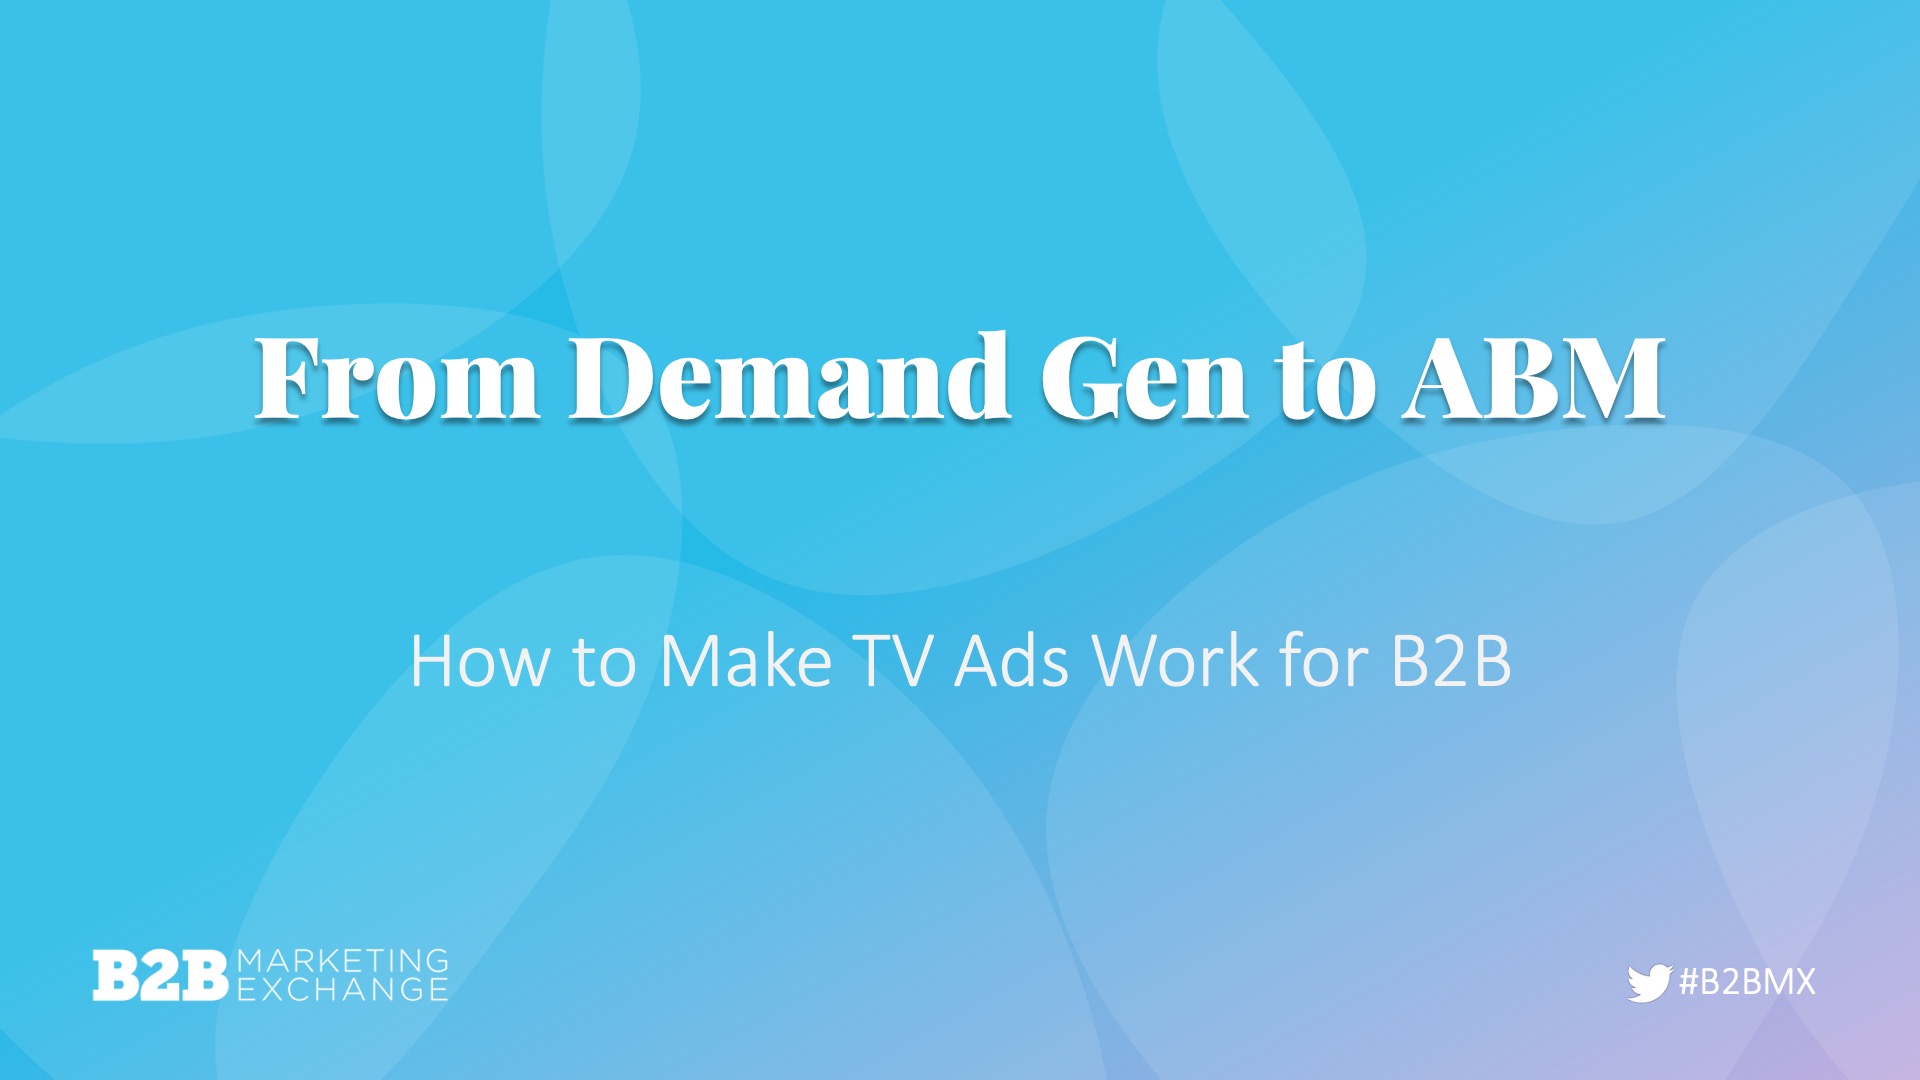 From Demand Gen to ABM: How to Make TV Ads Work for B2B